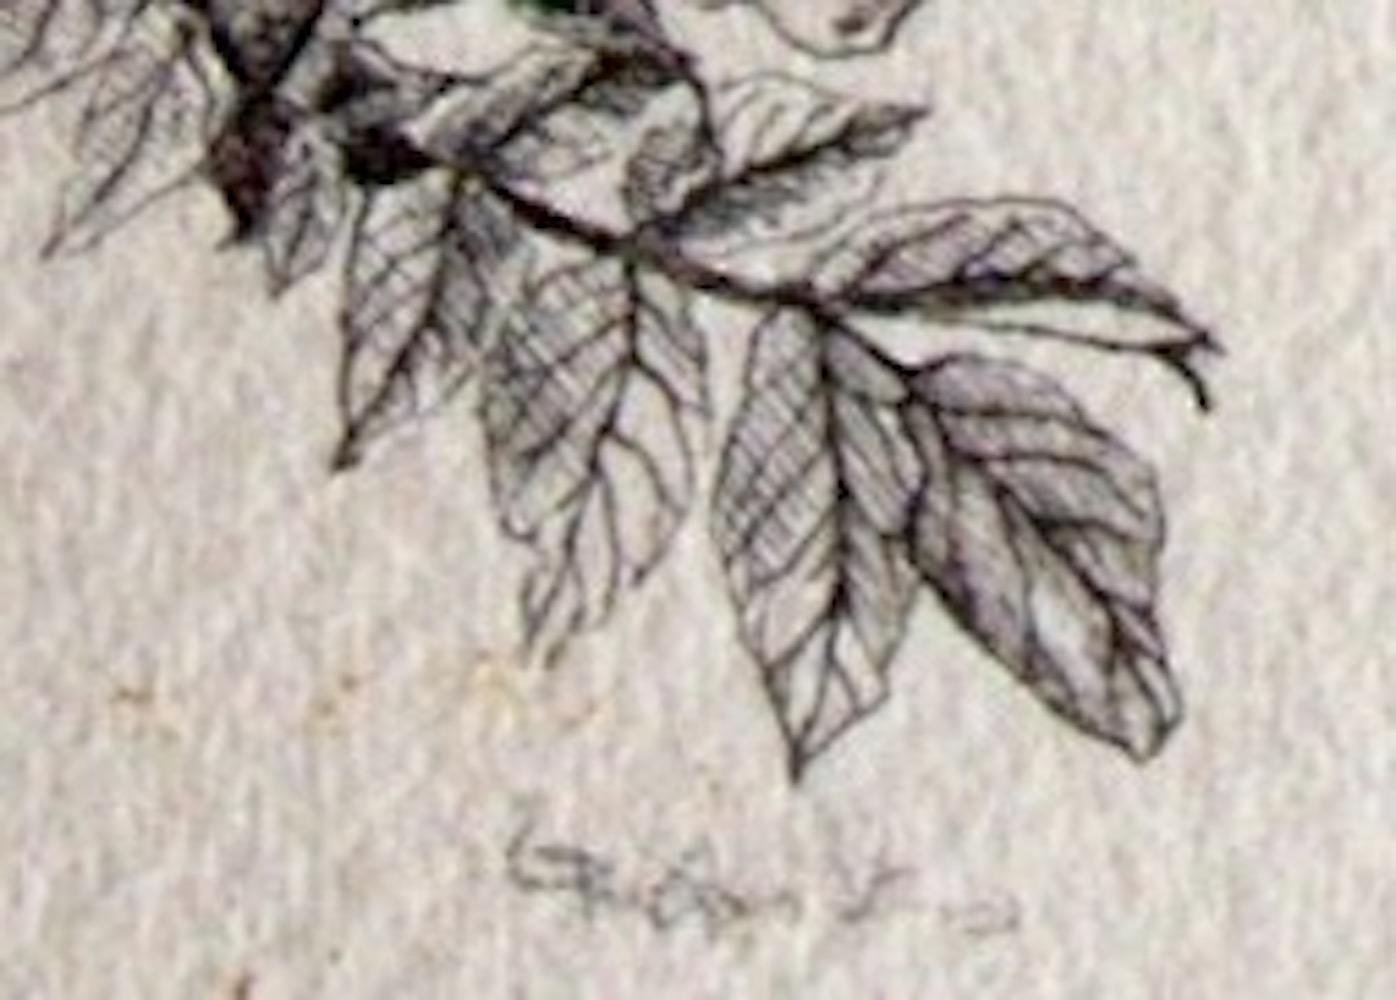 Signed in pencil. Blanche Grambs, whose career started with the WPA, later developed a career in illustration. Her botanical studies were widely admired. 